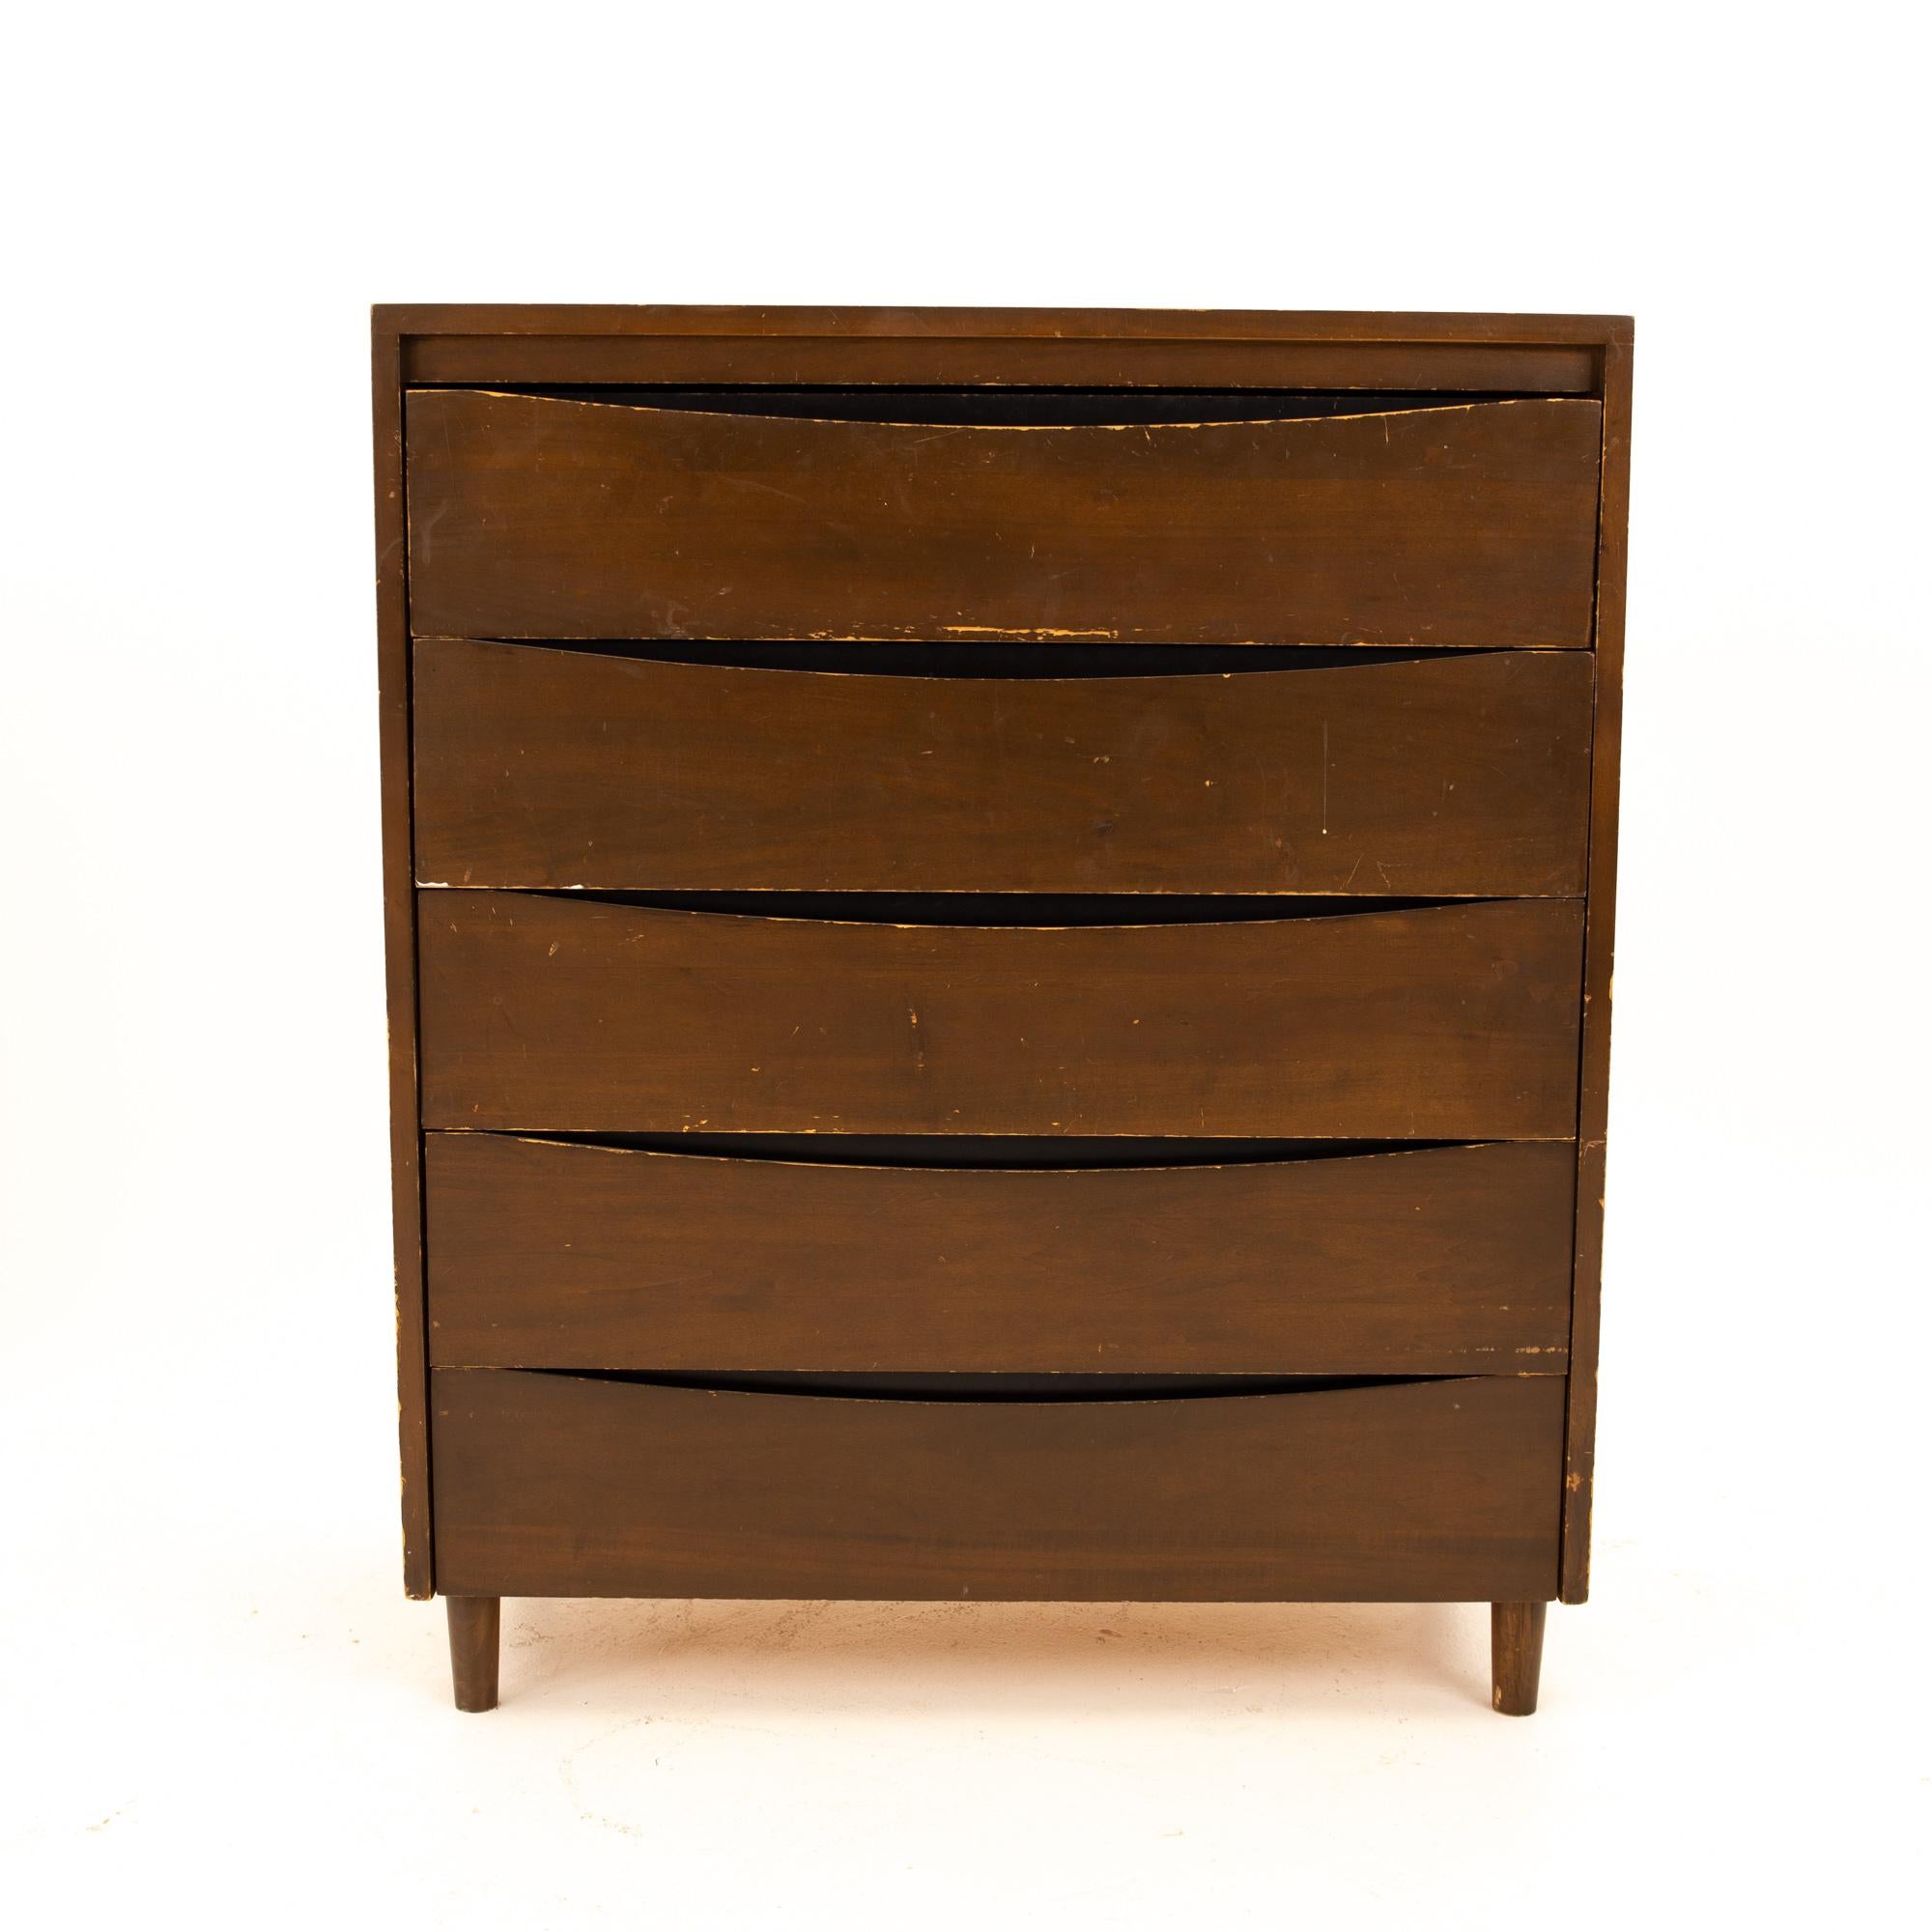 Childcraft Mid Century 5-drawer walnut highboy dresser
Dresser measures: 34 wide x 17.5 deep x 40.5 high

All pieces of furniture can be had in what we call restored vintage condition. That means the piece is restored upon purchase so it’s free of